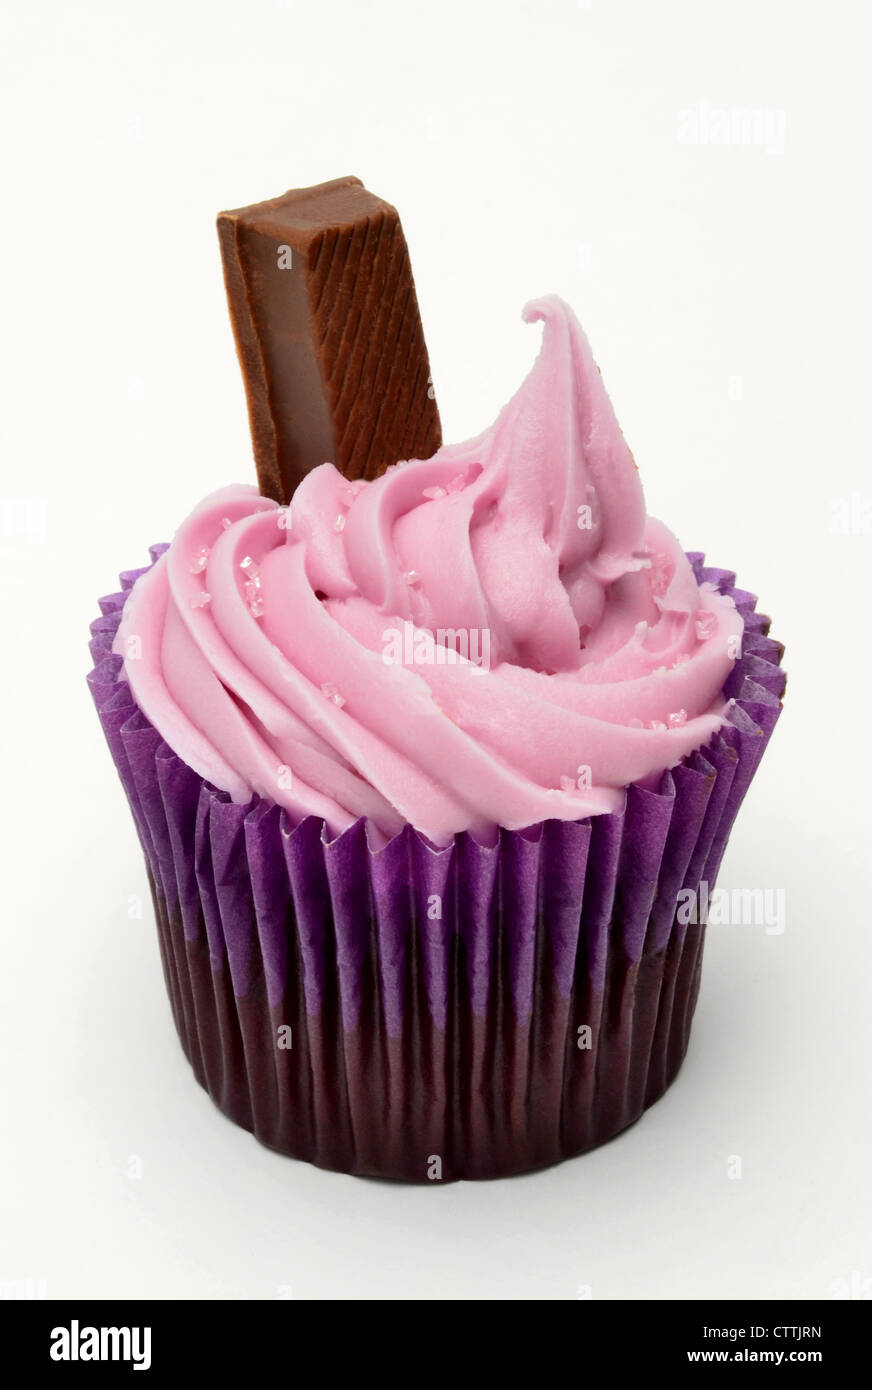 Cupcake with pink icing and chocolate finger against a white background Stock Photo